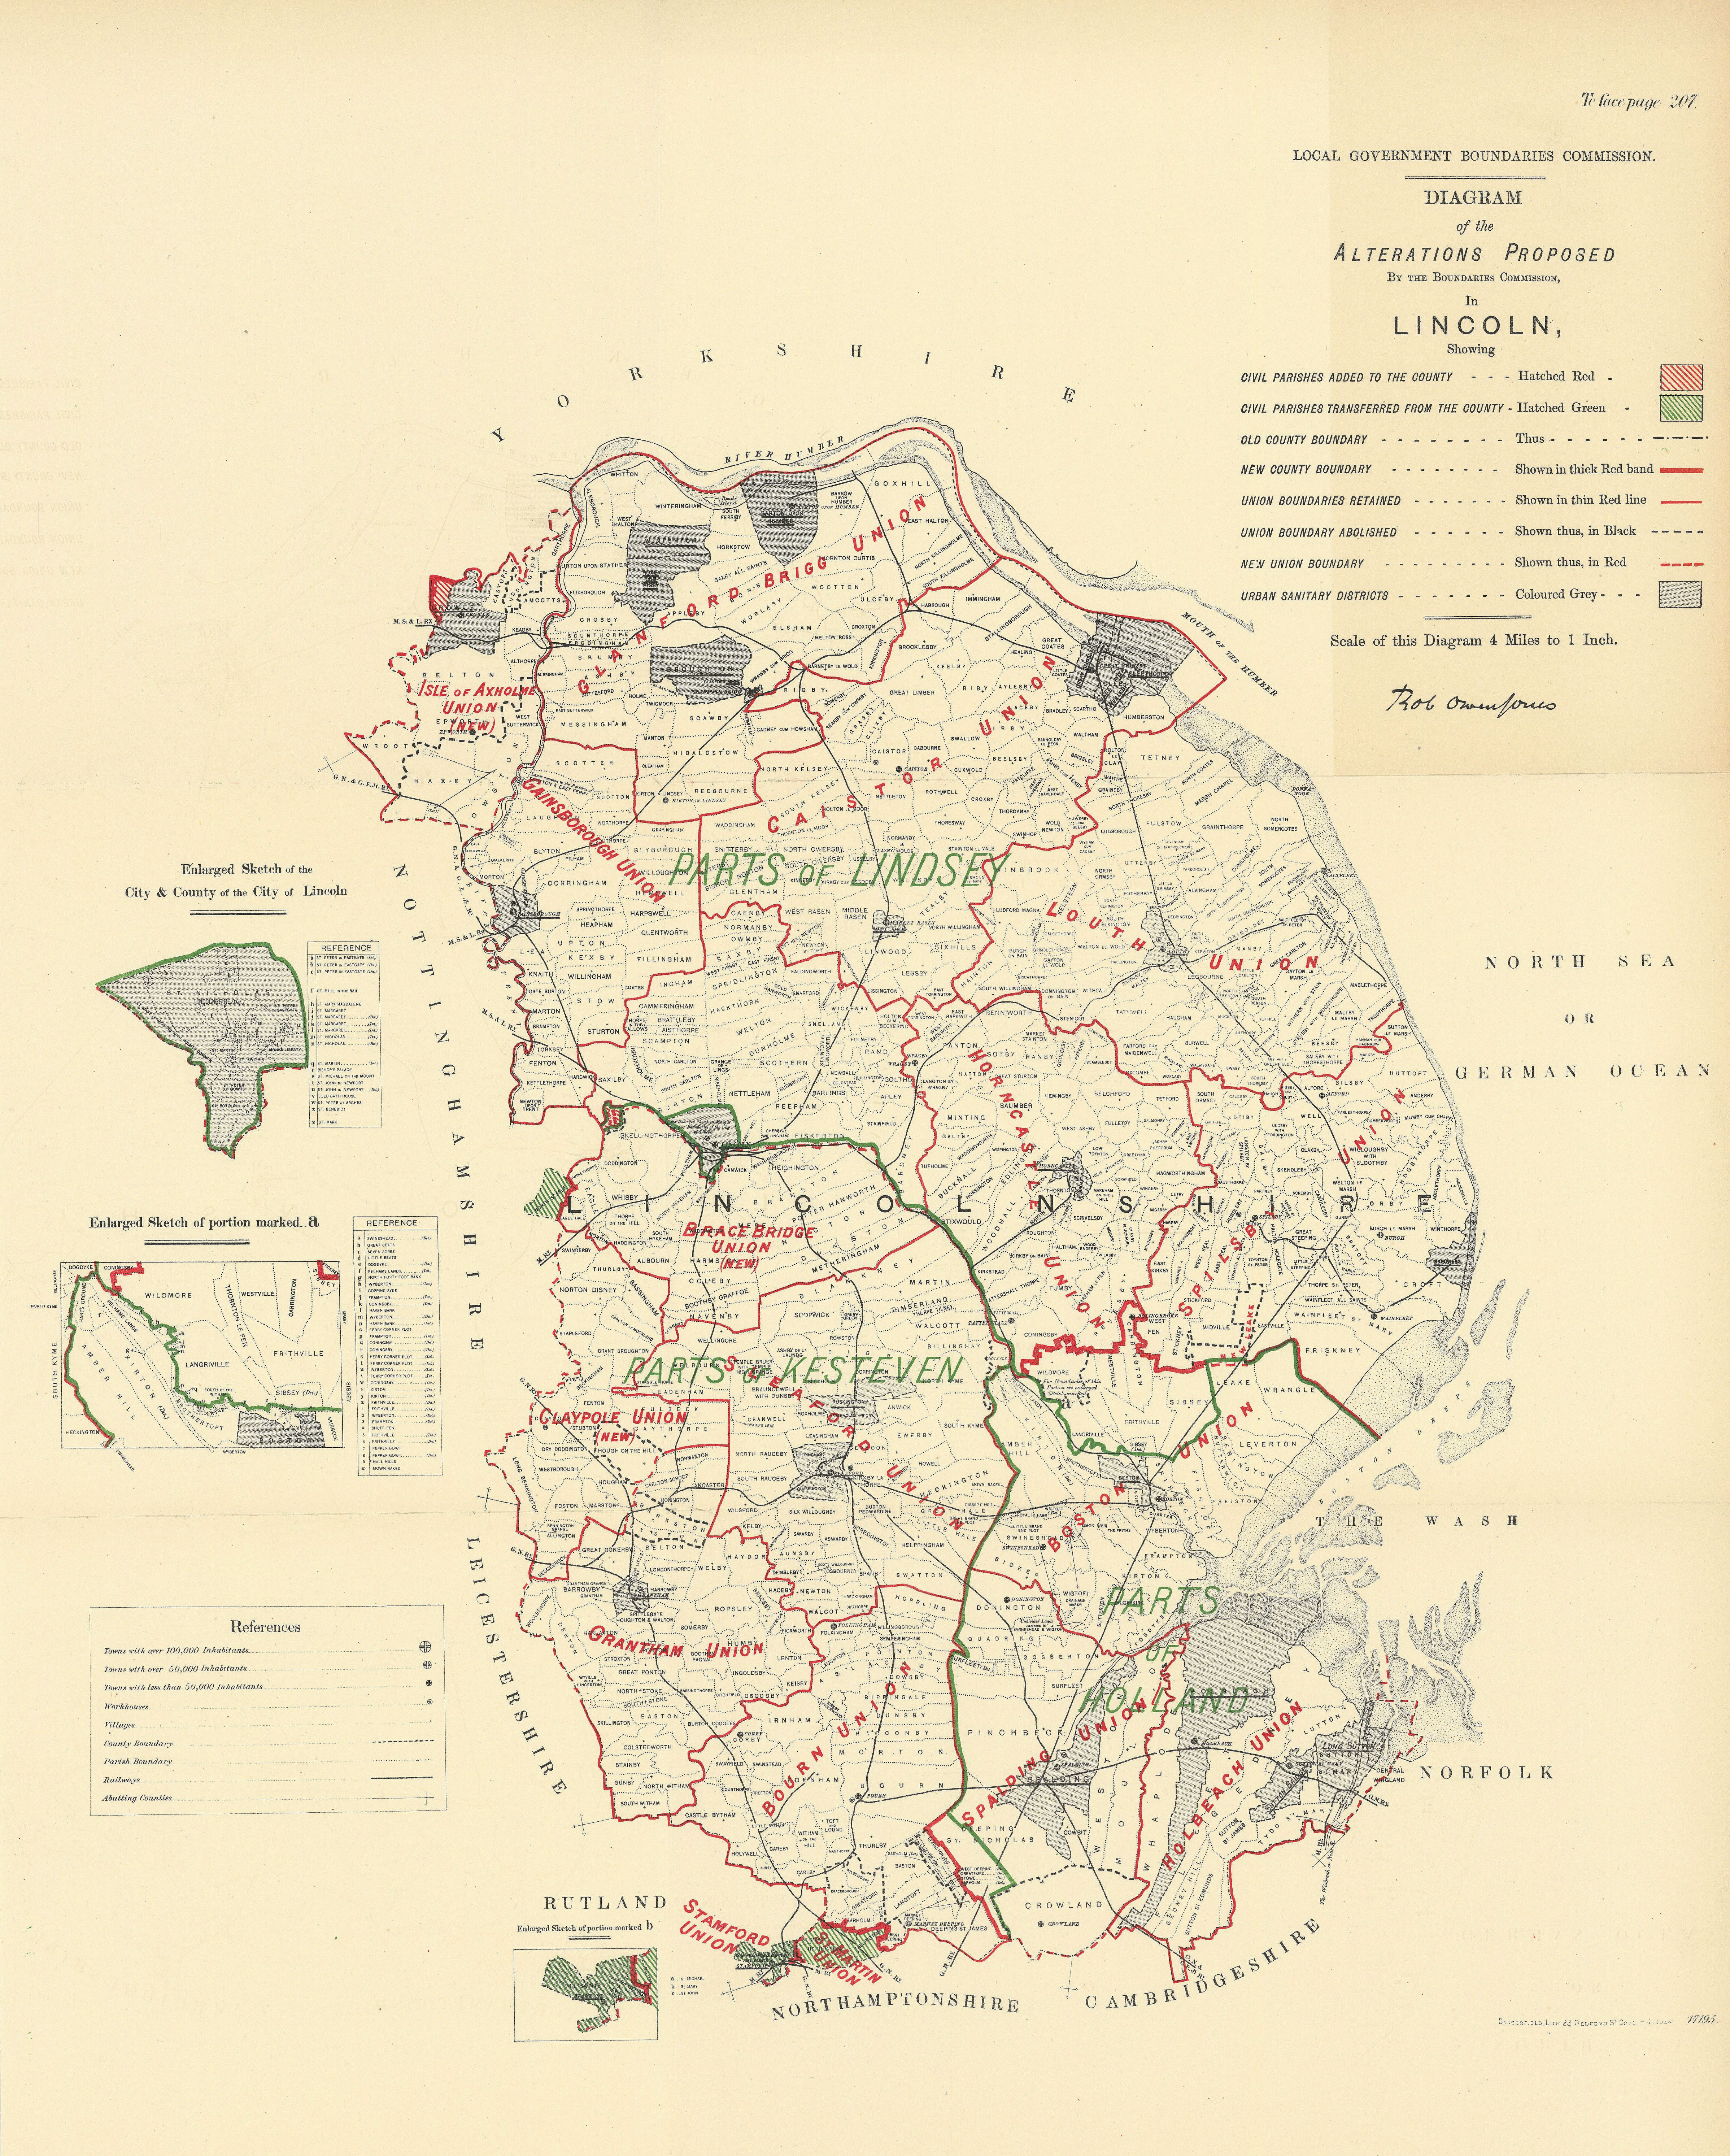 Alterations Proposed in Lincolnshire. JONES. BOUNDARY COMMISSION 1888 old map